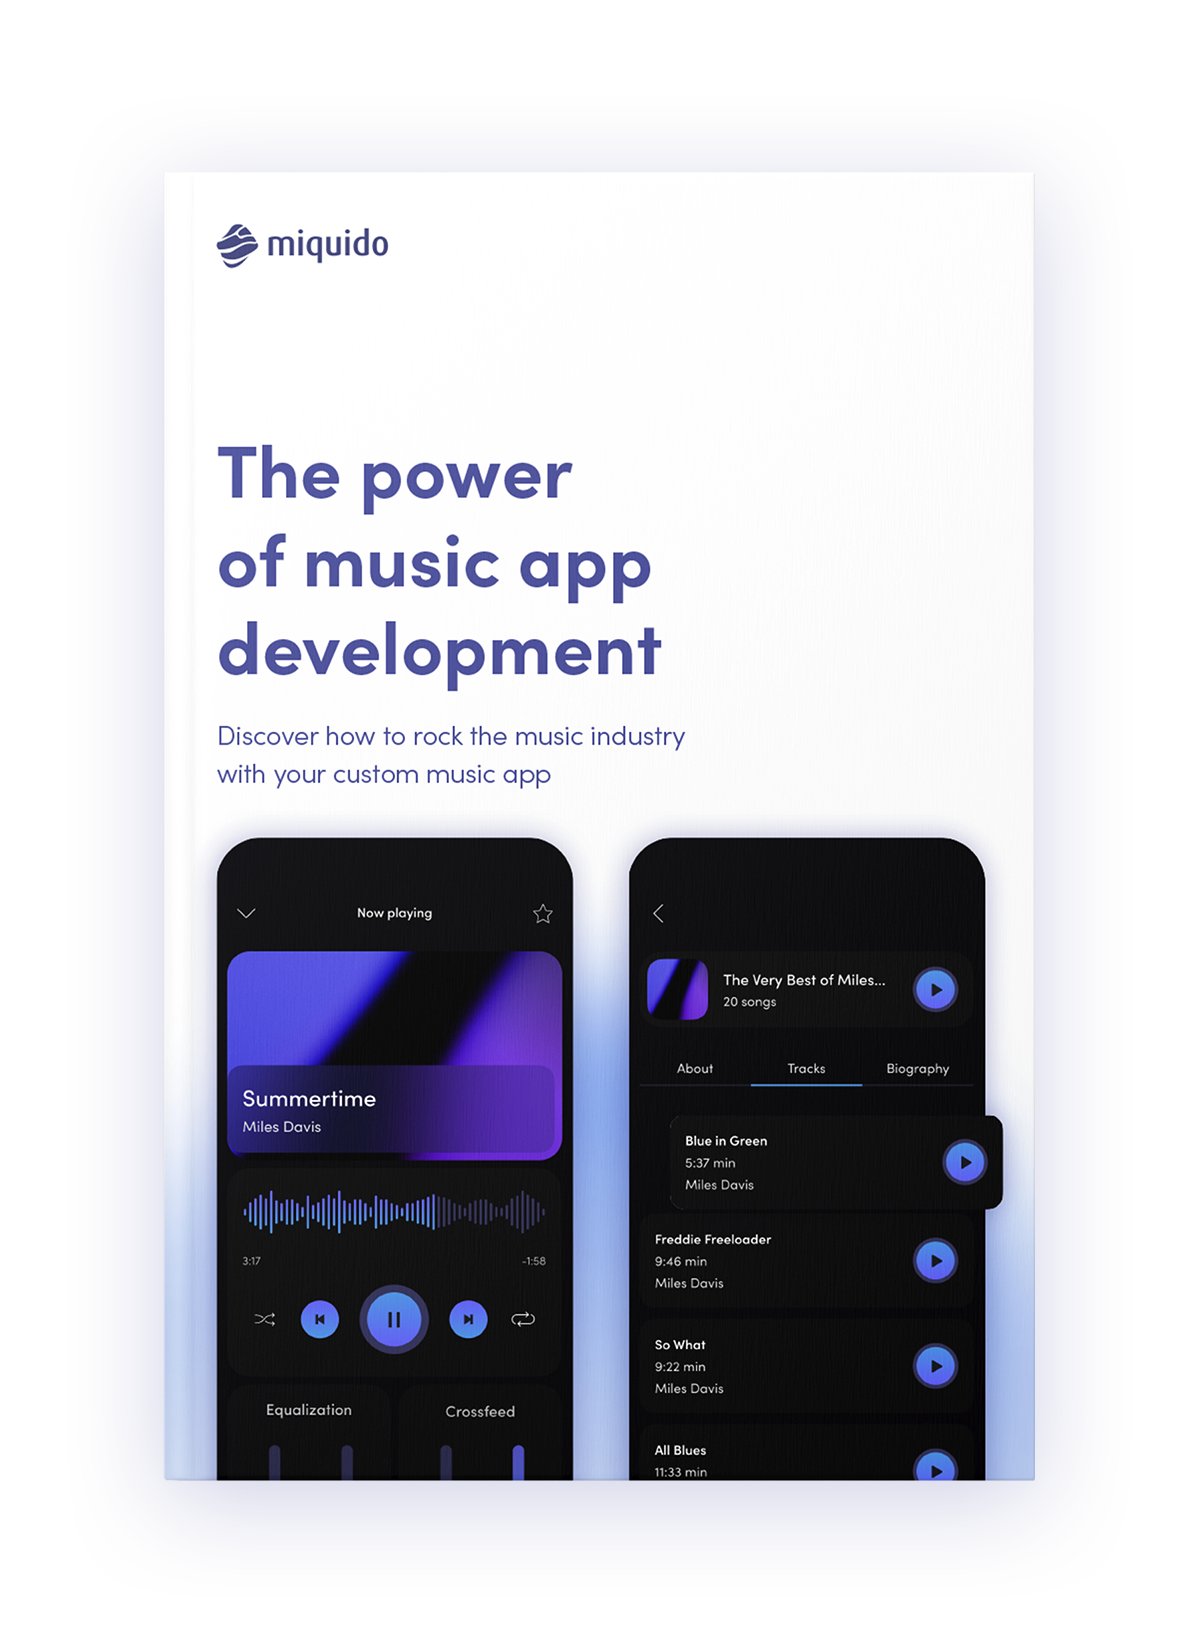 The power of music app development_book cover mockup_